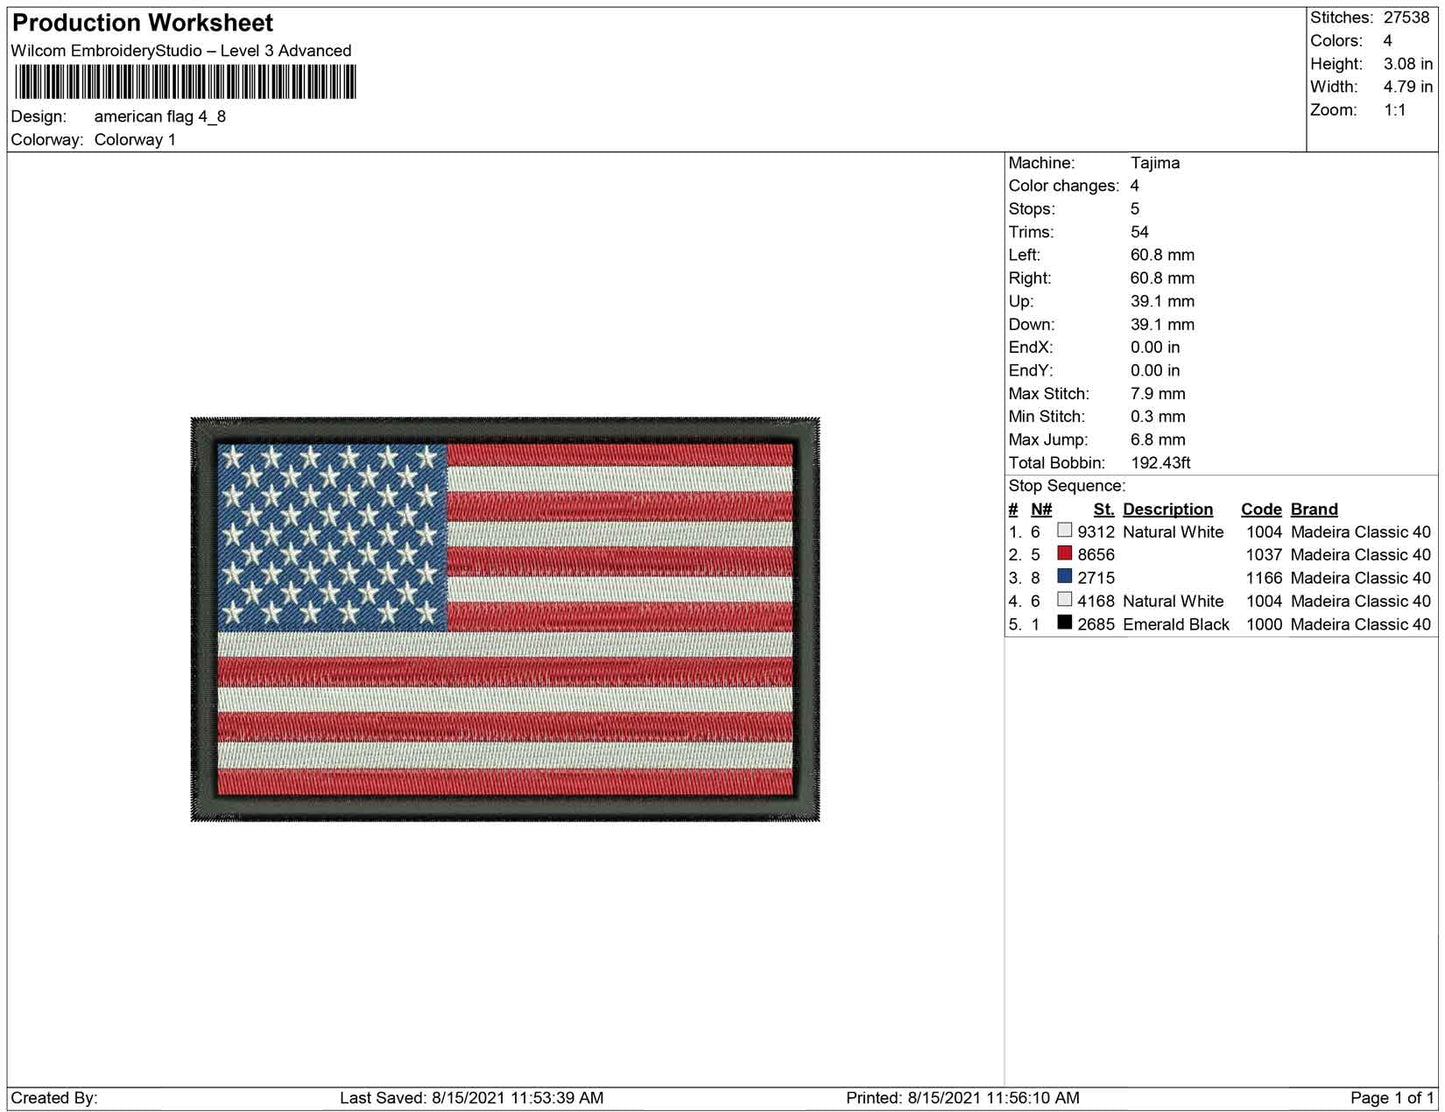 American Flag embroidery